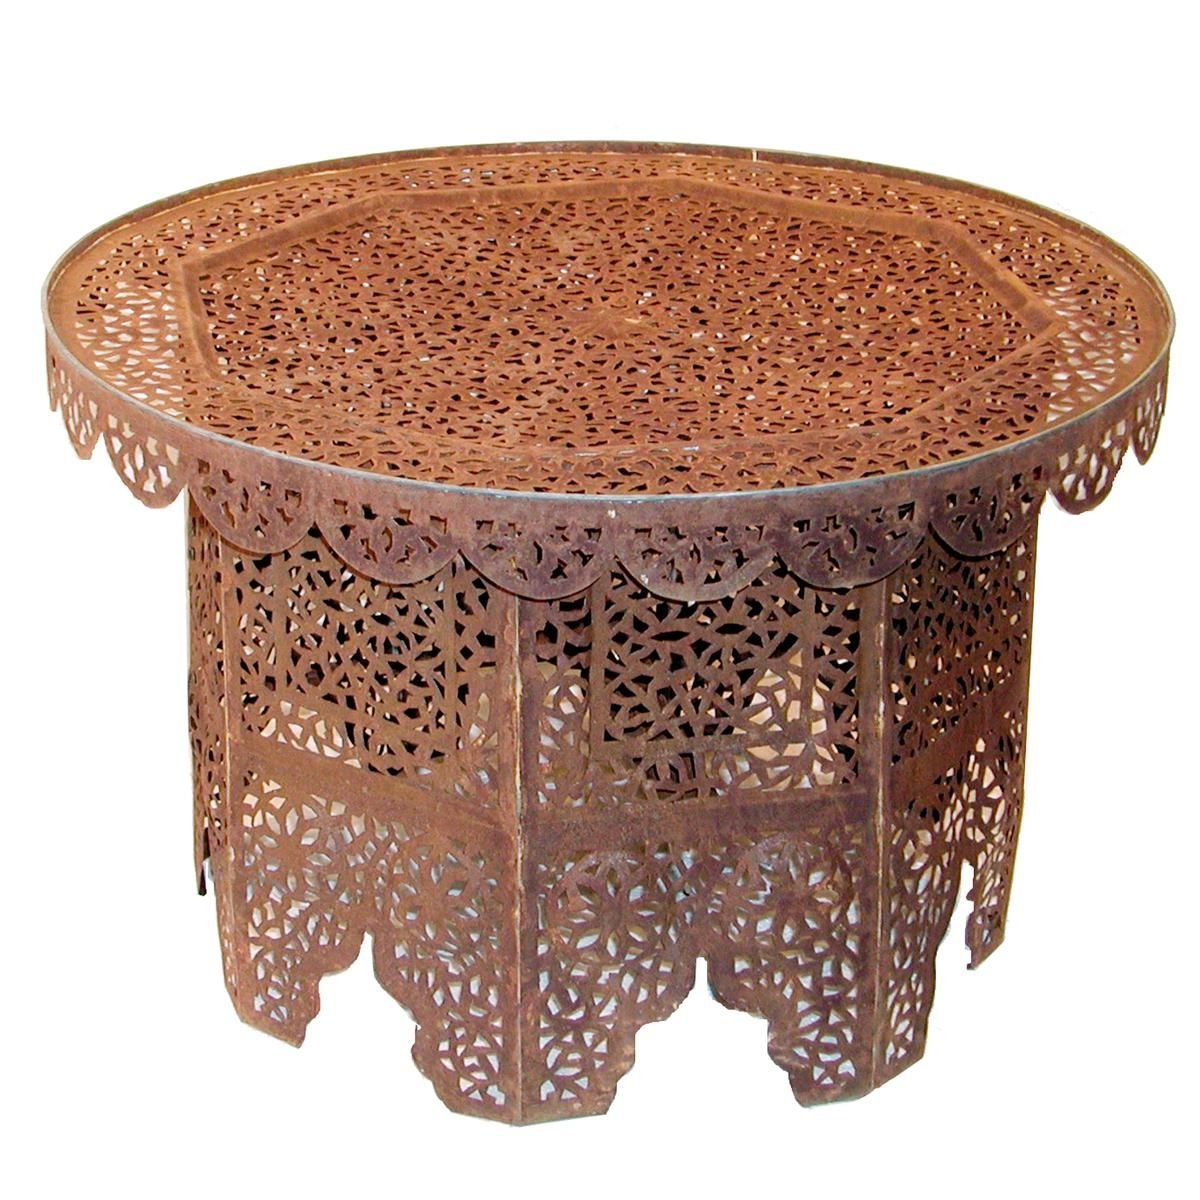 Details about   HANDMADE ROUND WOODEN COFFEE CARVING MOROCCAN TABLE DESIGN 